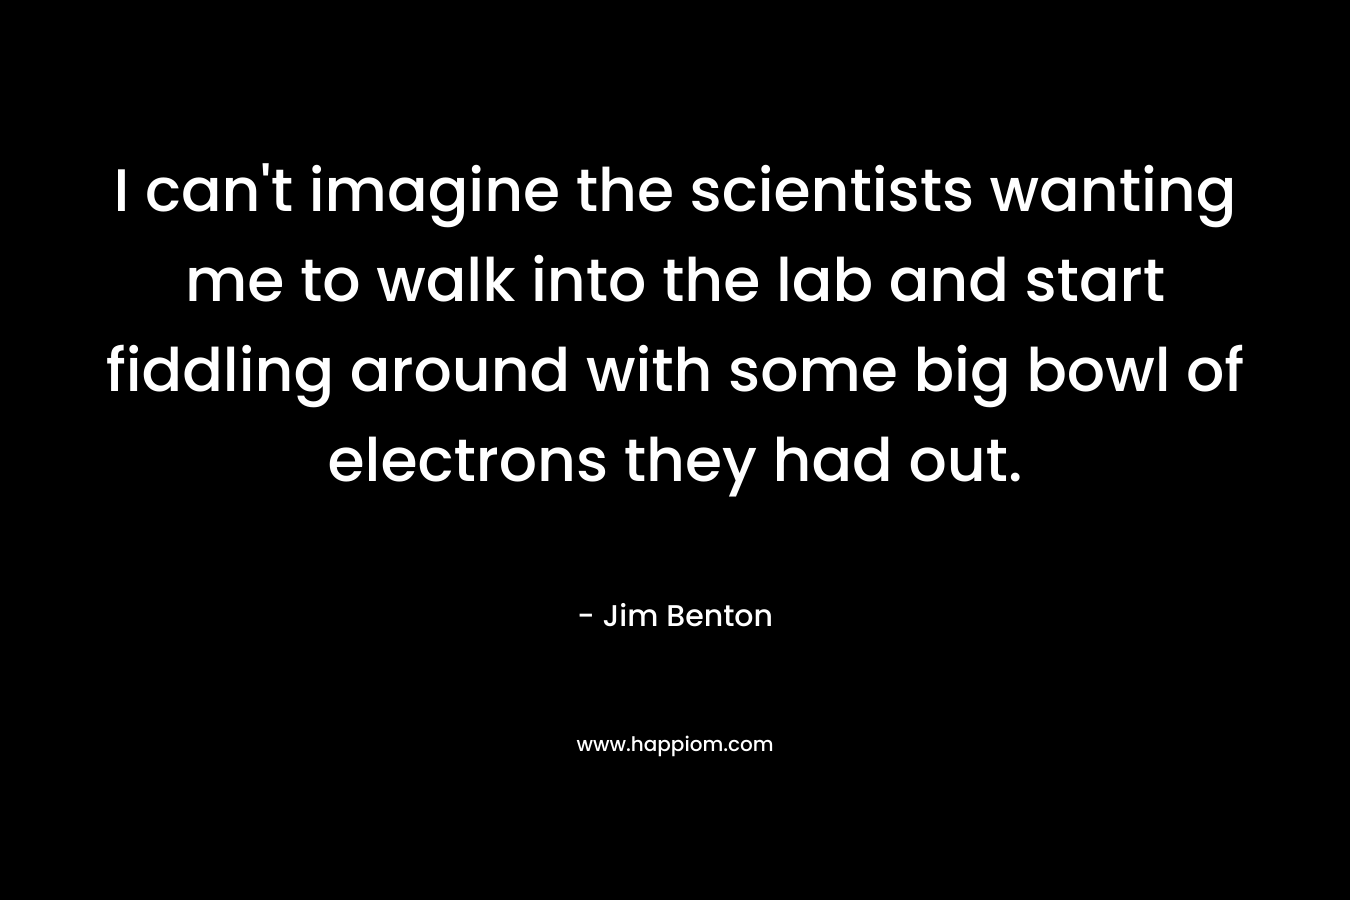 I can’t imagine the scientists wanting me to walk into the lab and start fiddling around with some big bowl of electrons they had out. – Jim Benton